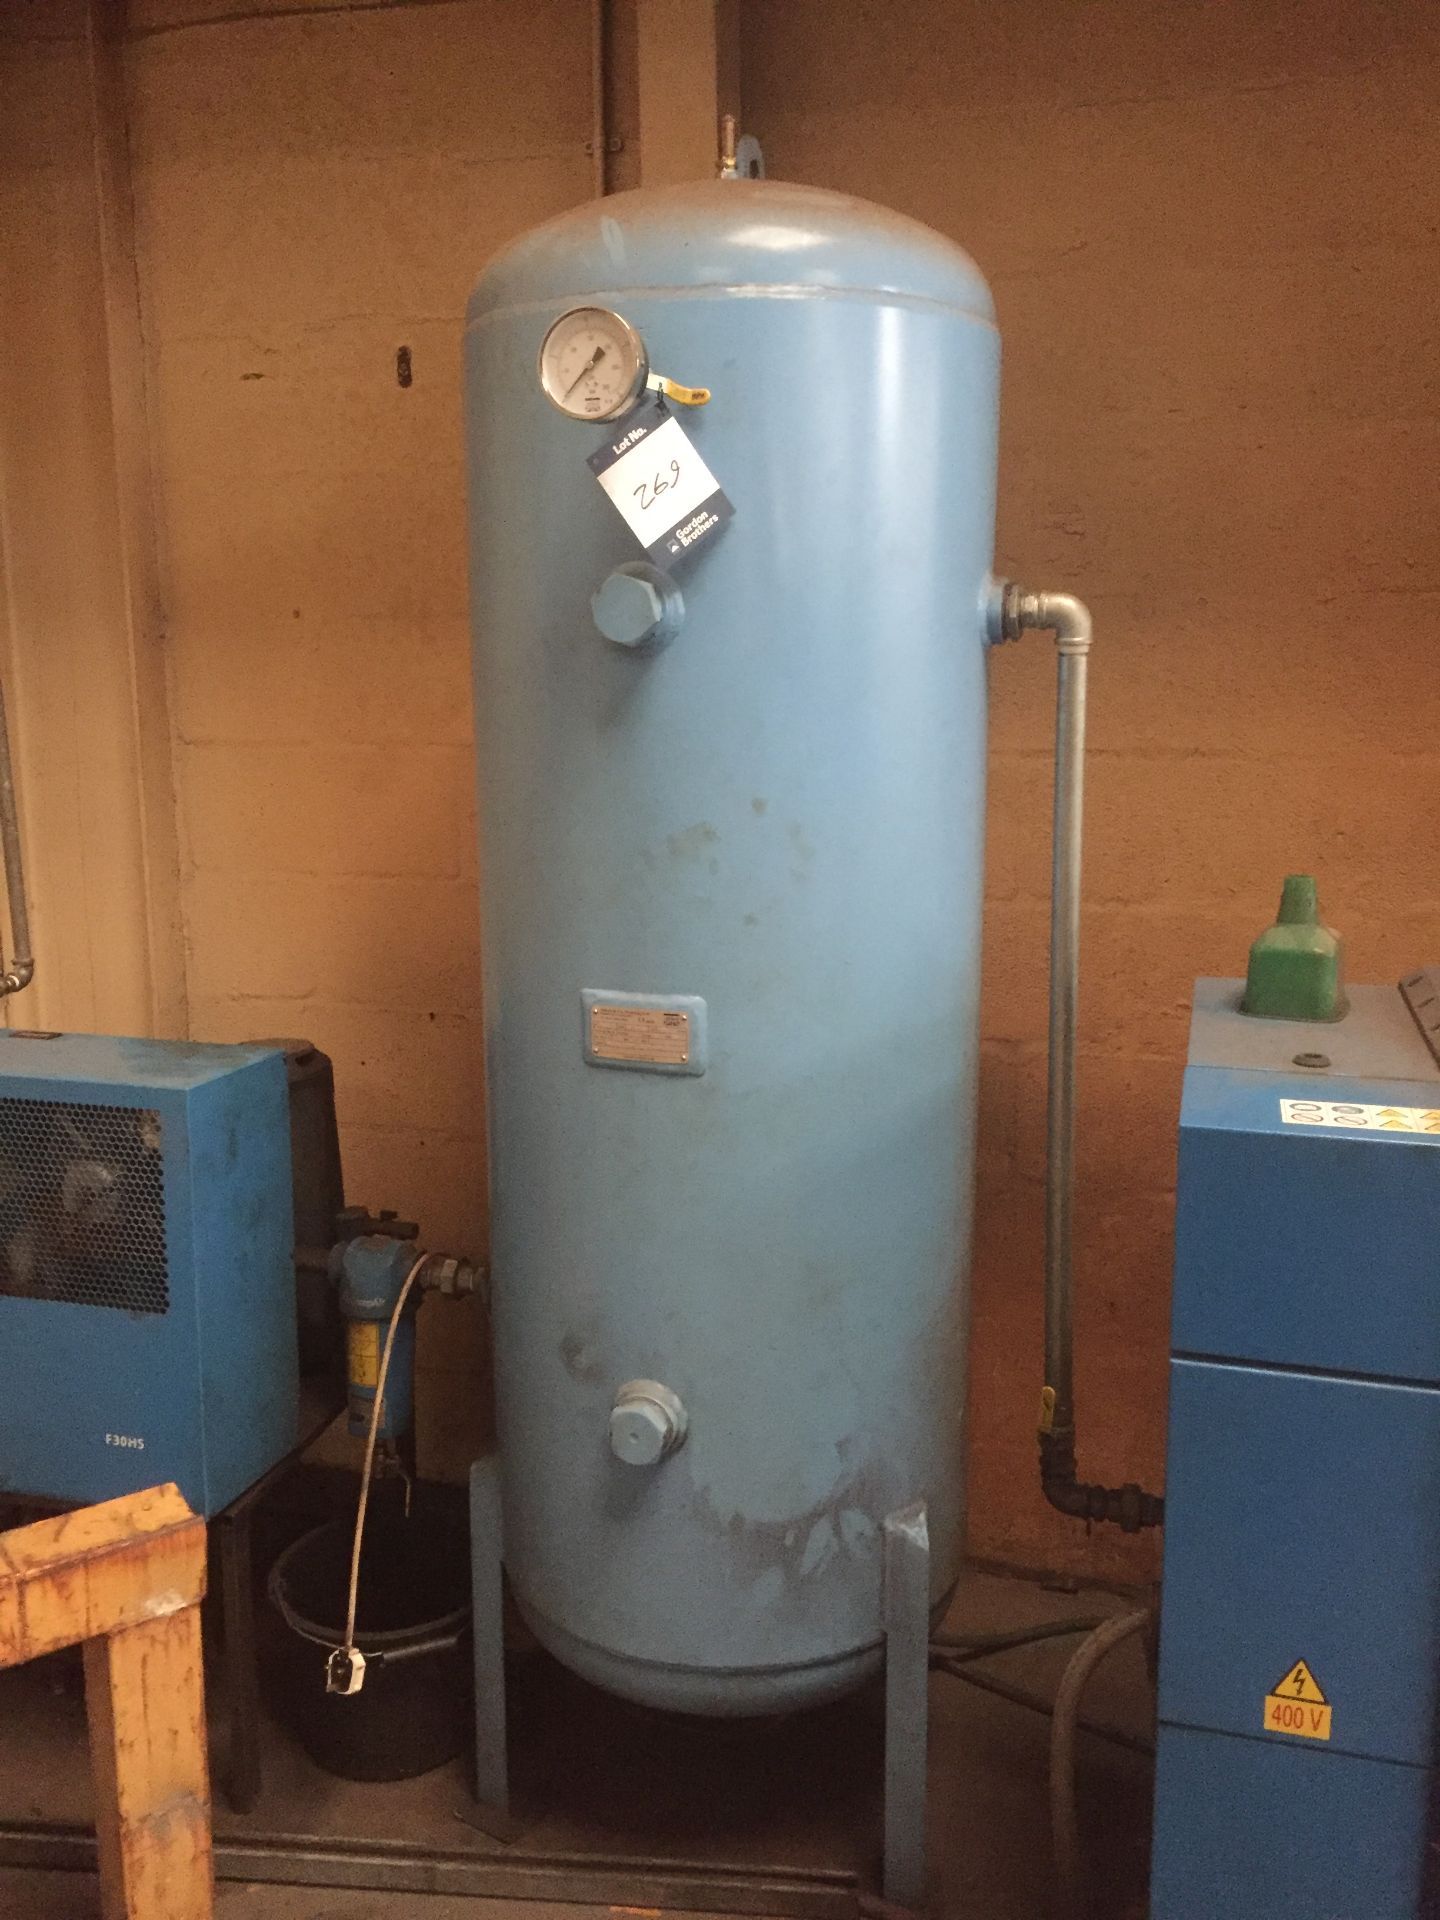 Compair L18-13A rotary screw air compressor, Serial No. CD10022707001 (2016), 13 BAR, with Abbot and - Image 3 of 5